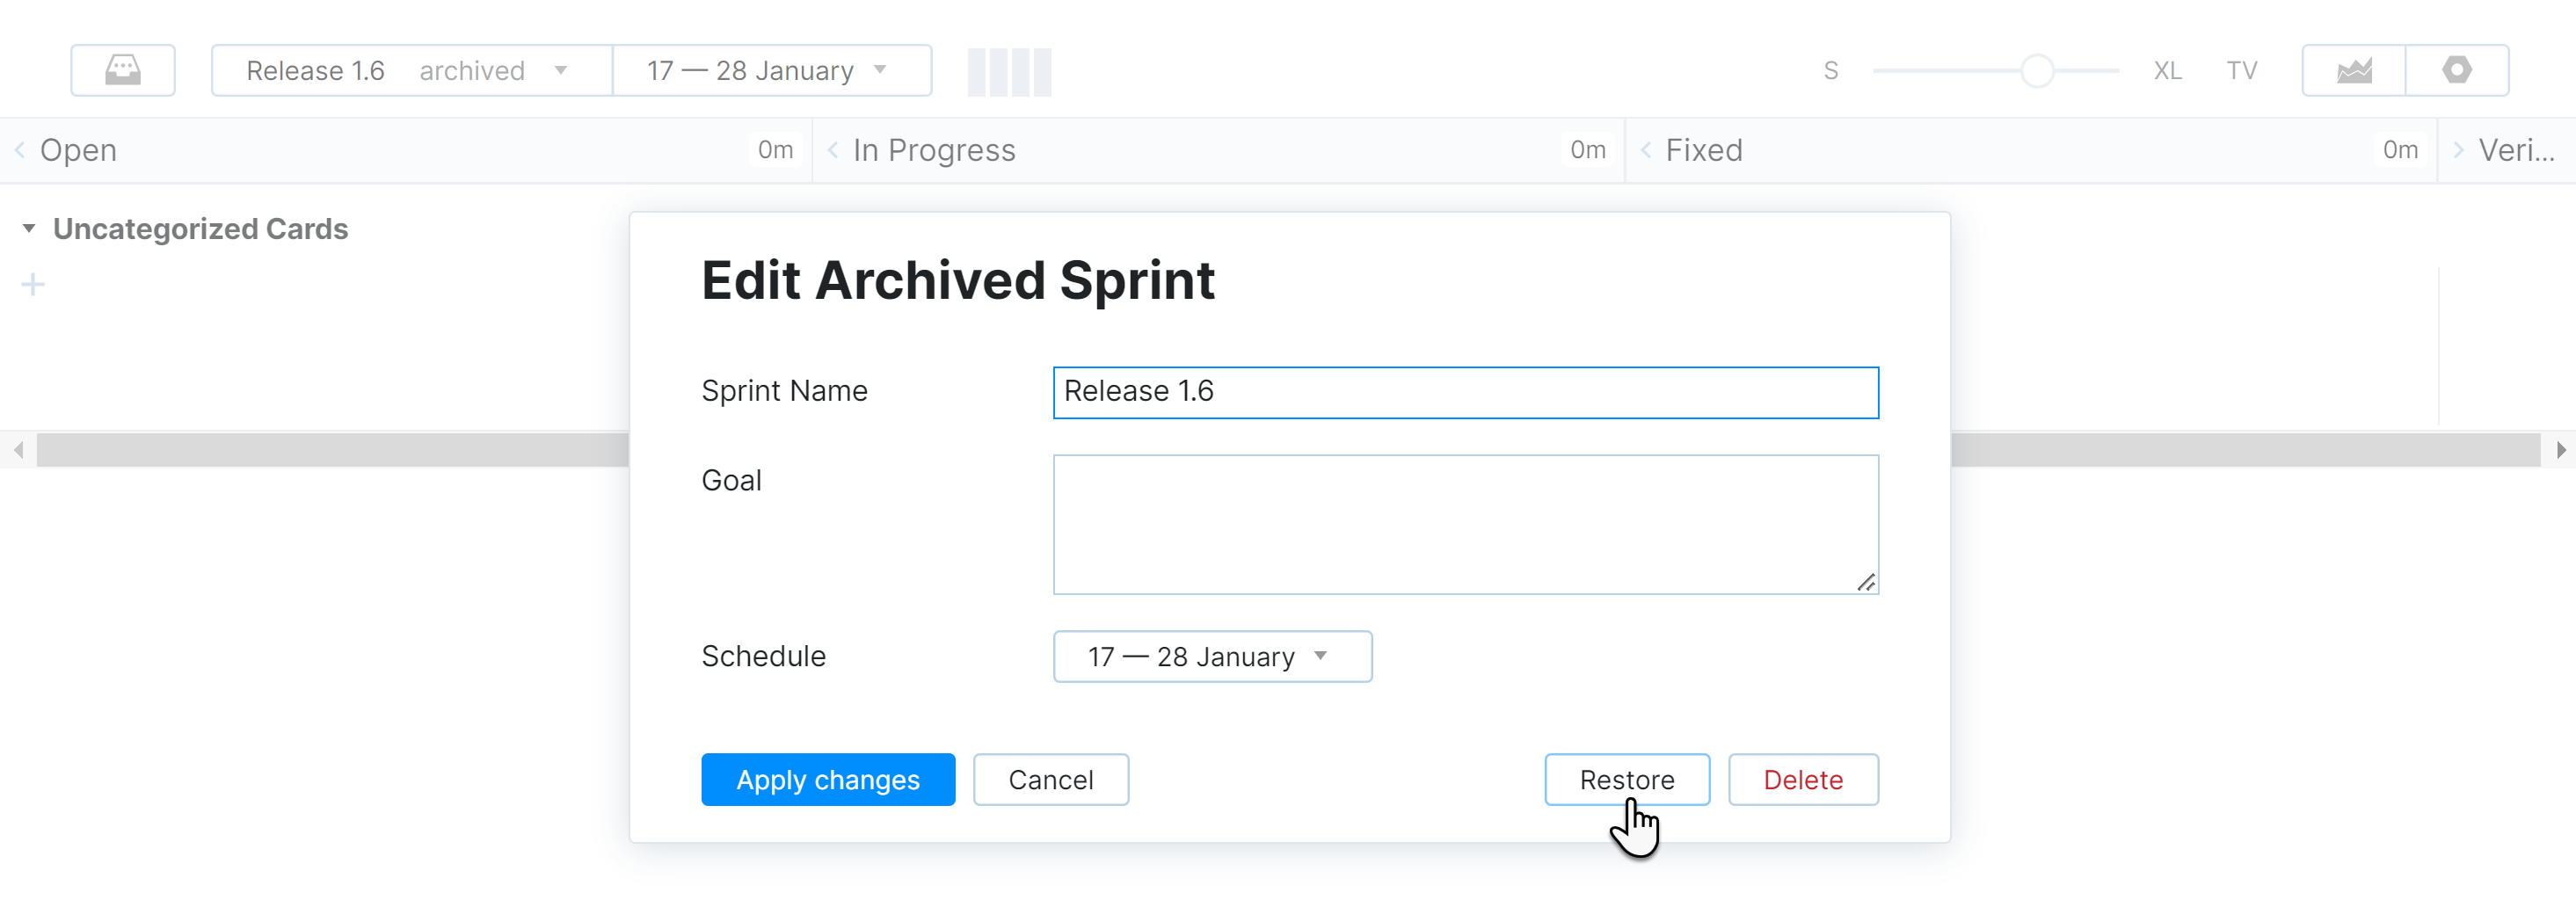 Restore option in the Edit Archived Sprint dialog.